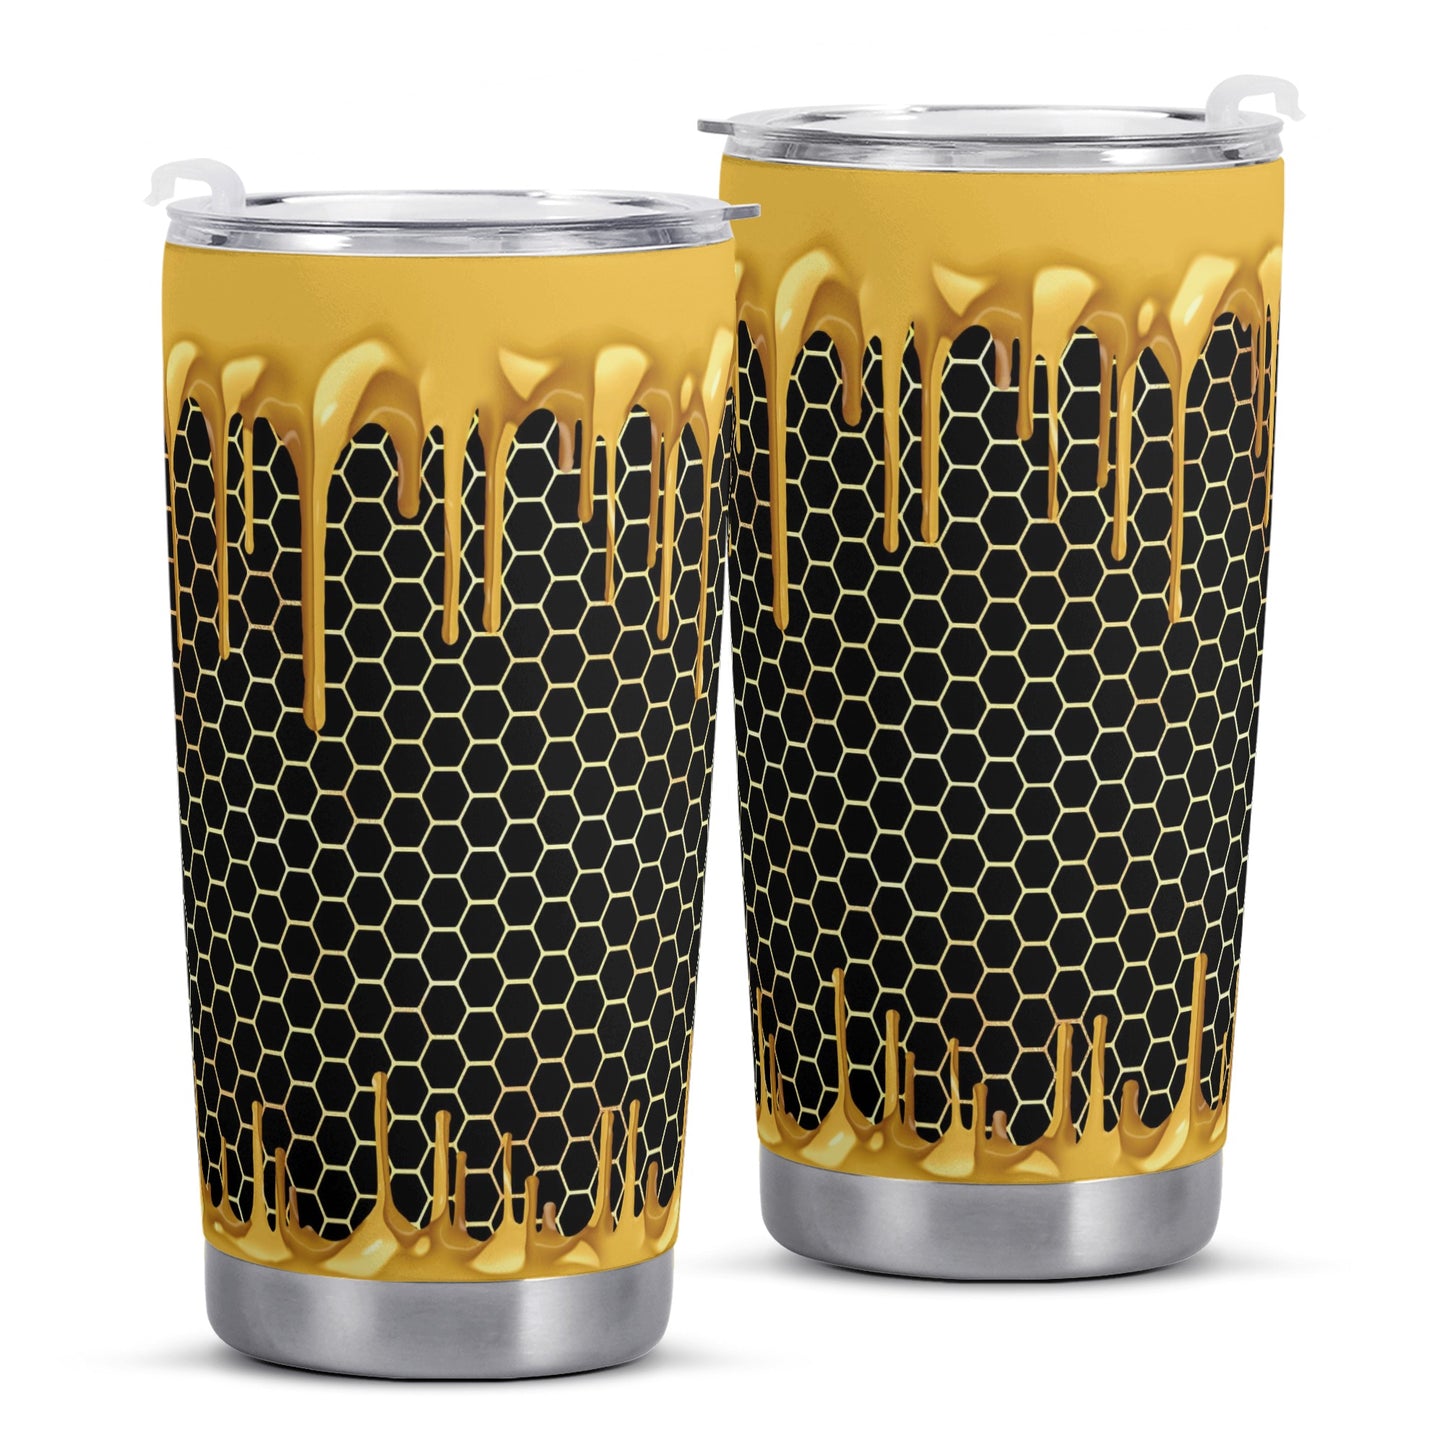 Glam Dripping Honey Black Coffee Cup